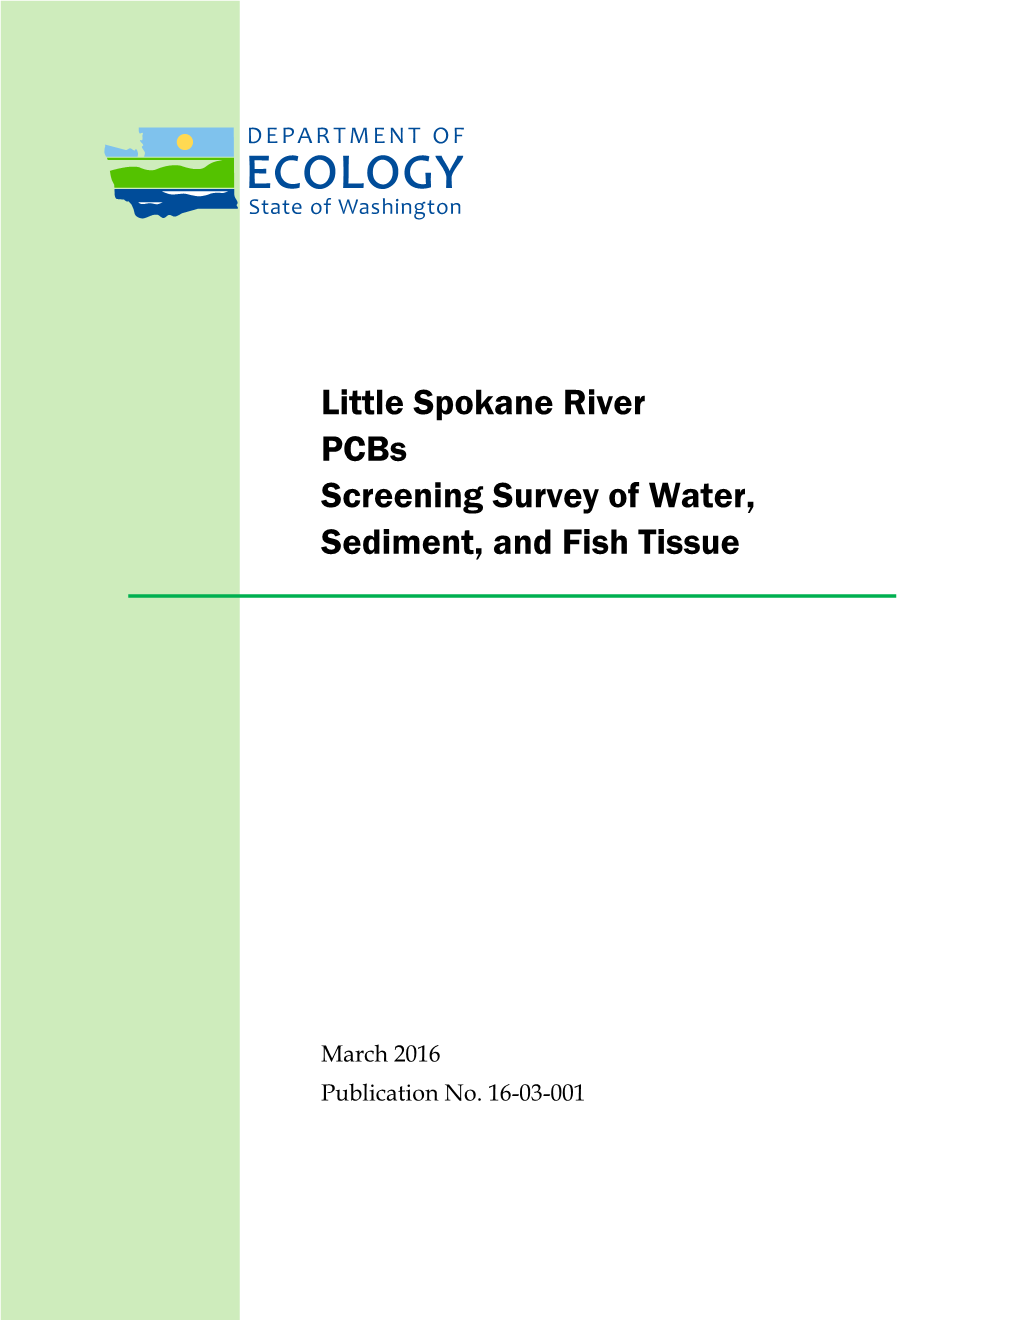 Little Spokane River Pcbs Screening Survey of Water, Sediment, and Fish Tissue